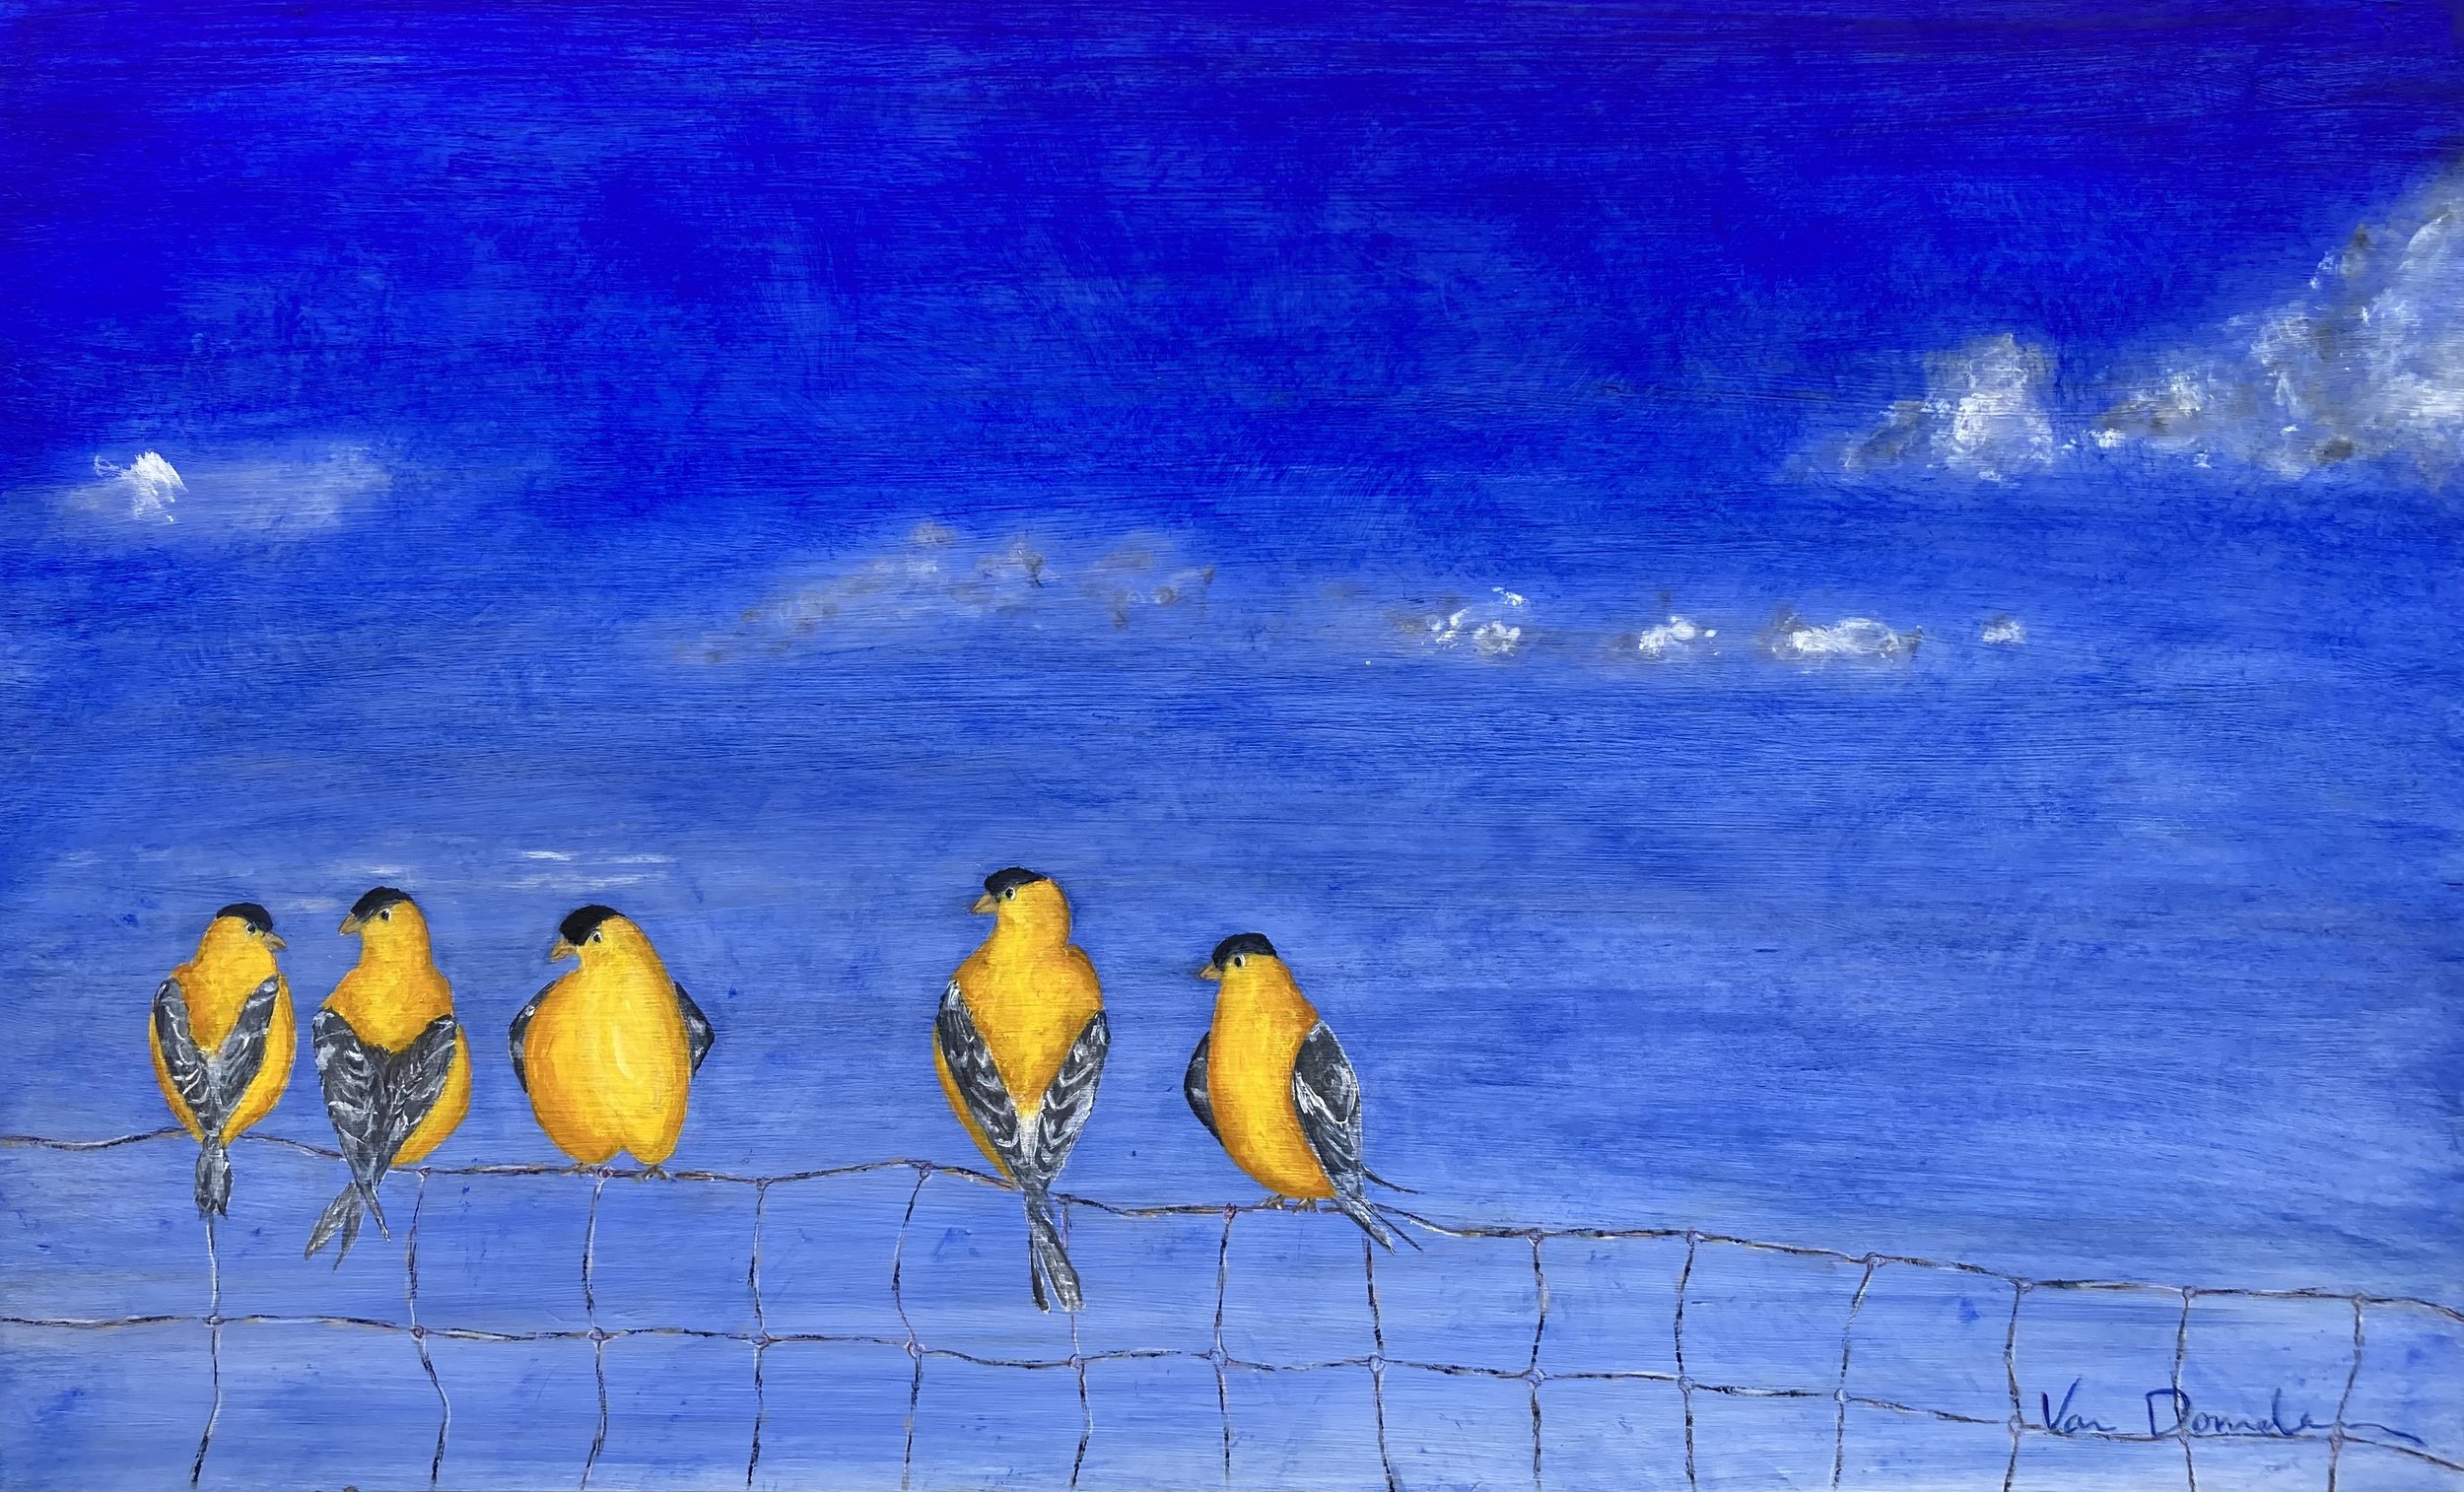 Goldfinches, acrylic on board, aprox 28x14"